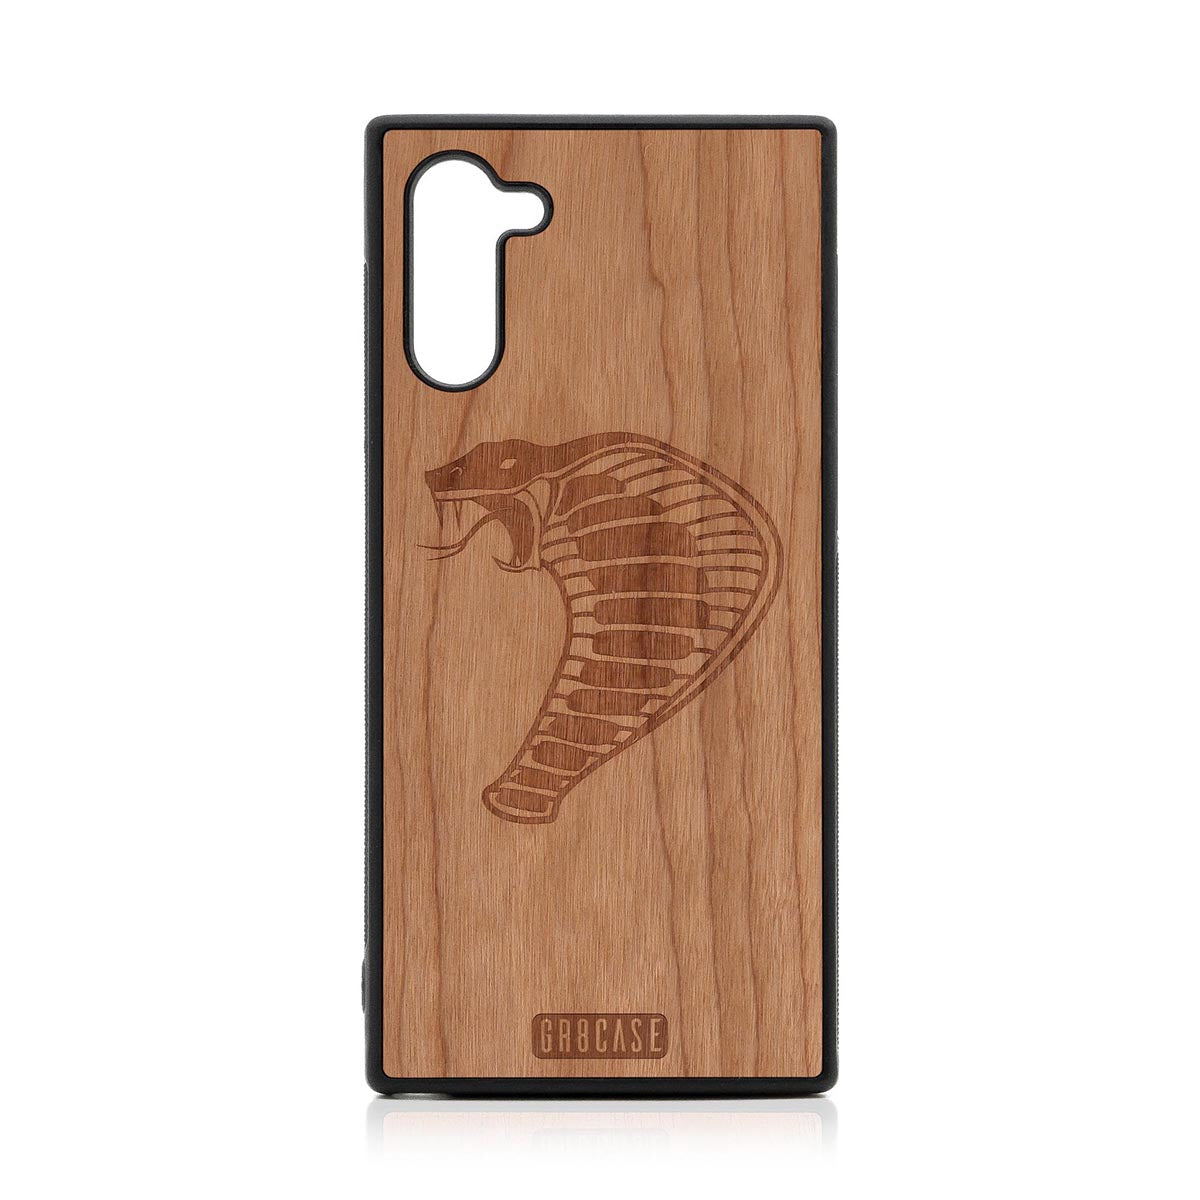 Cobra Design Wood Case For Samsung Galaxy Note 10 by GR8CASE